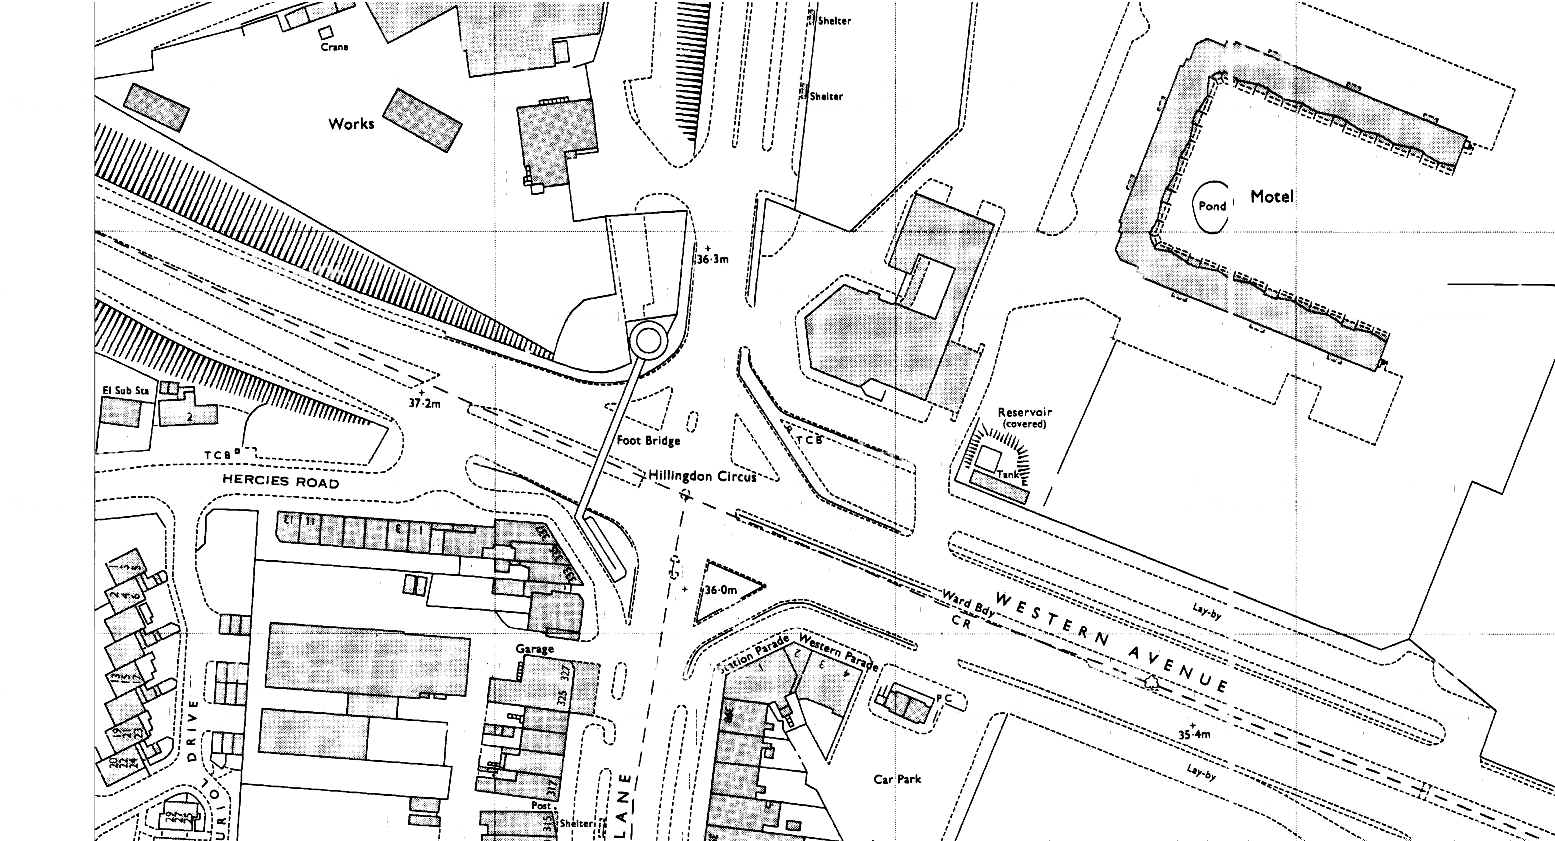 X54--Hillingdon Circus Box--1980 OS map 1-1250 scale (not there-too late).png